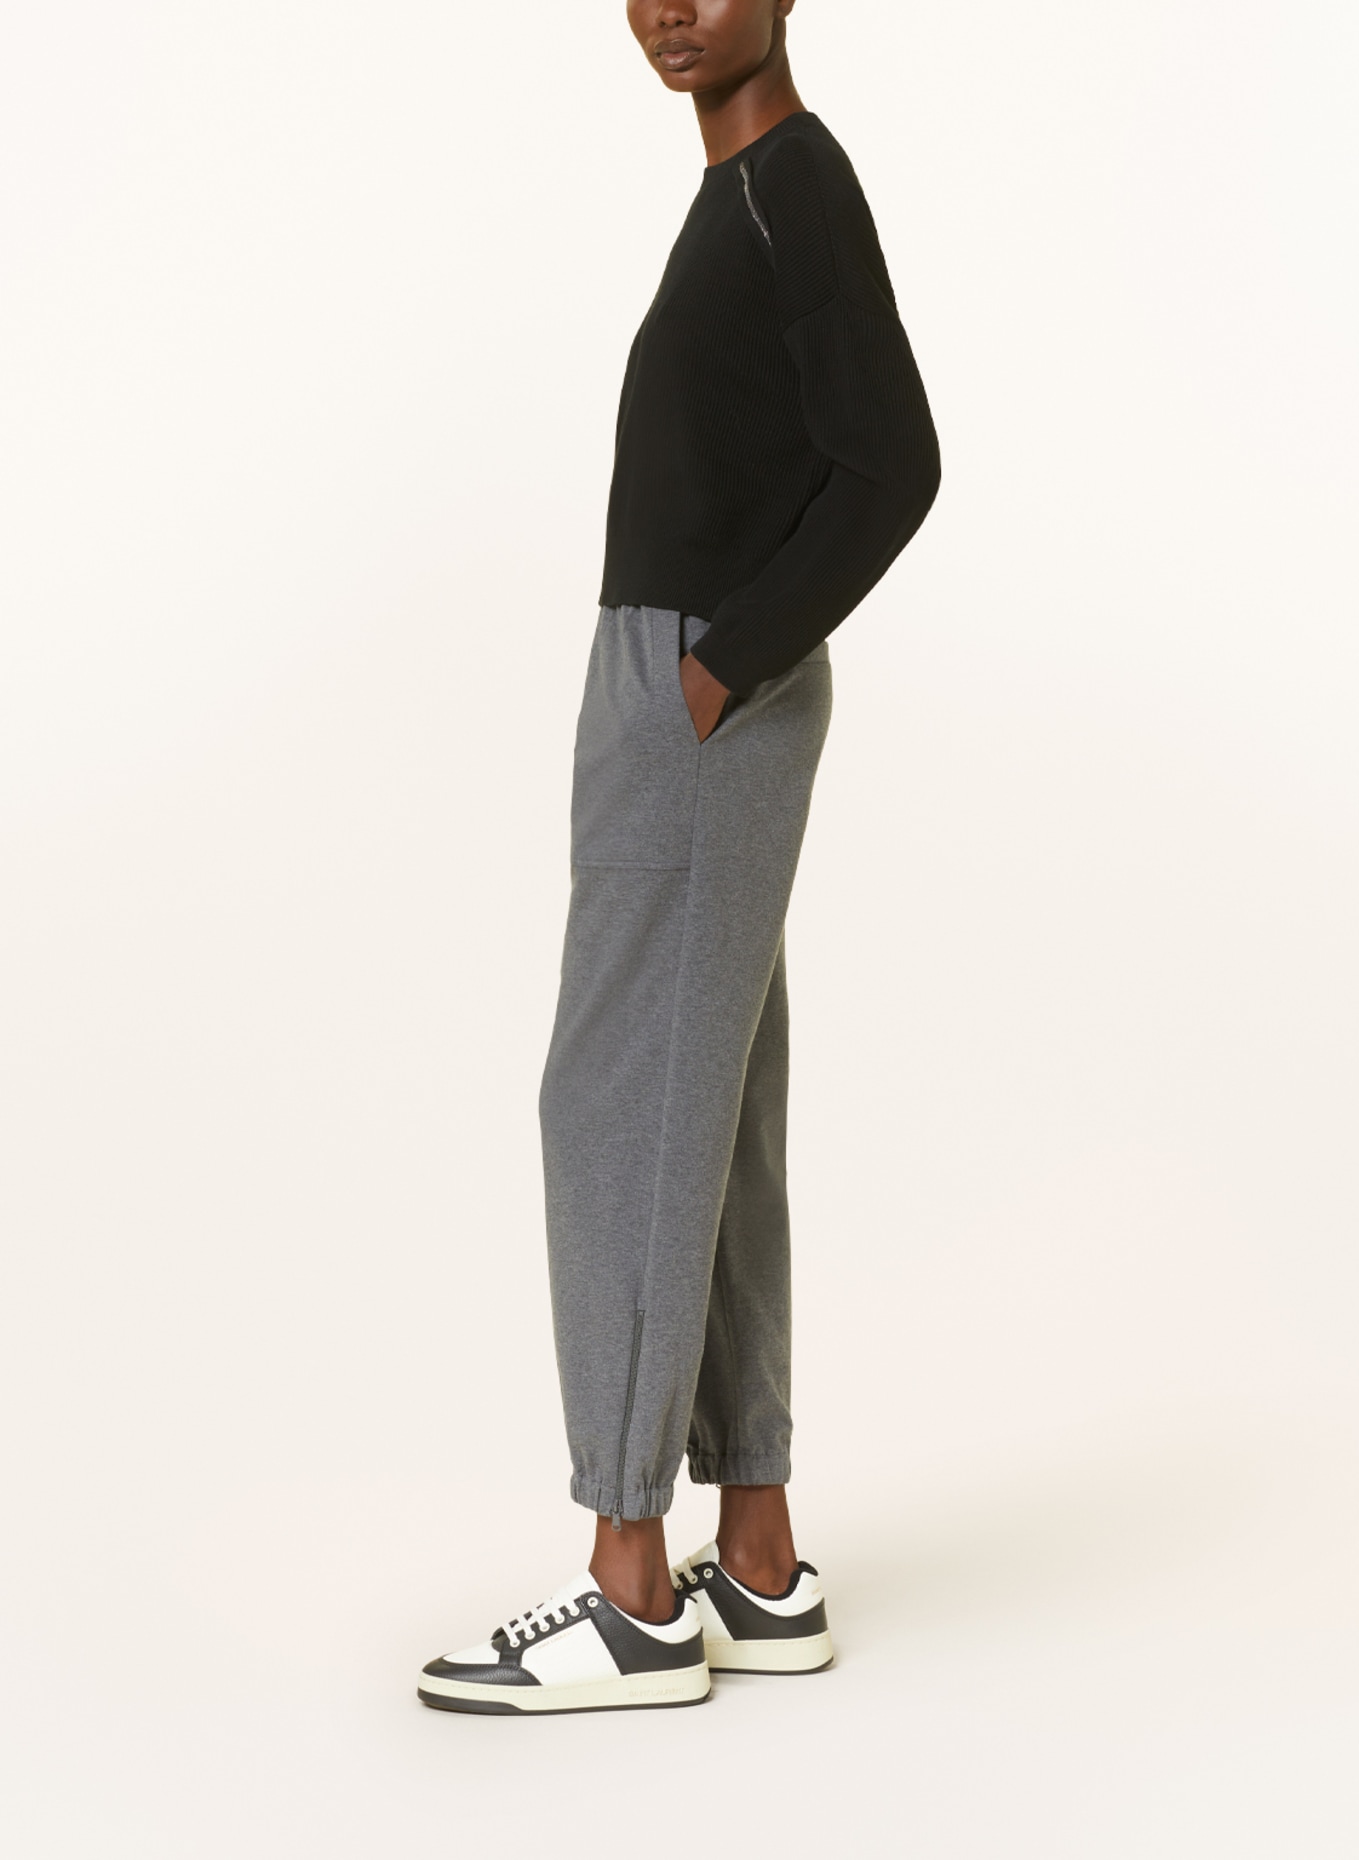 BRUNELLO CUCINELLI Pants in jogger style, Color: GRAY (Image 4)